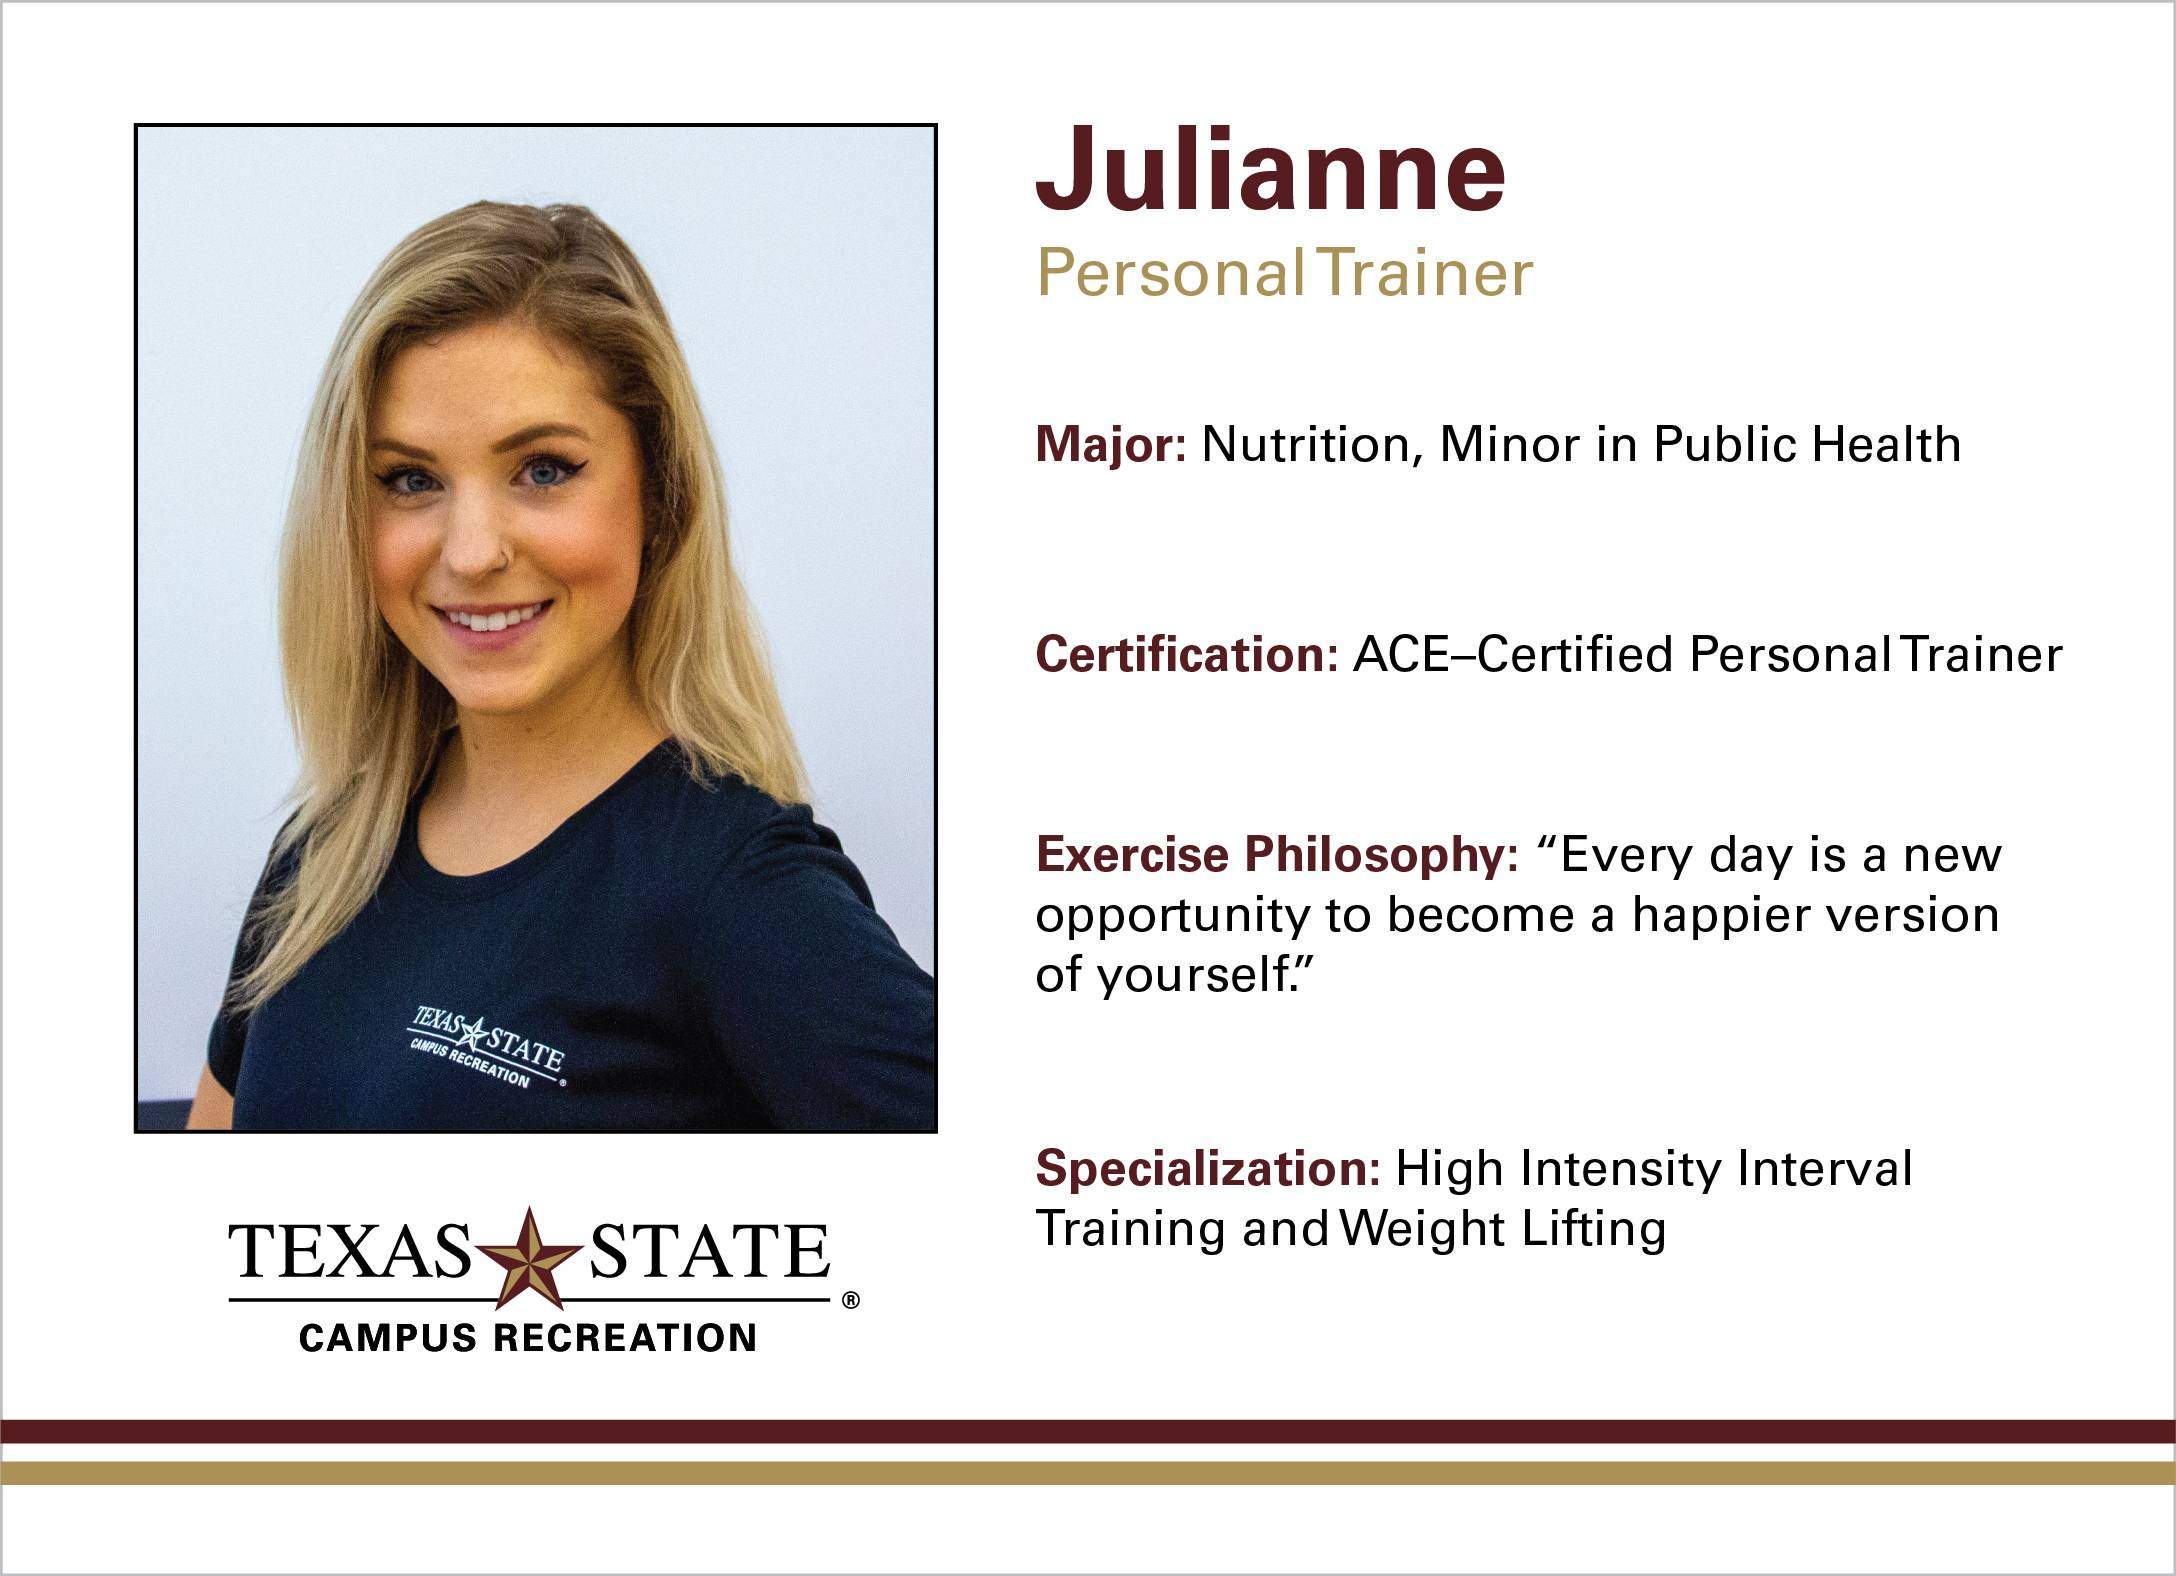 A bio of Julianne one of the SRC trainers